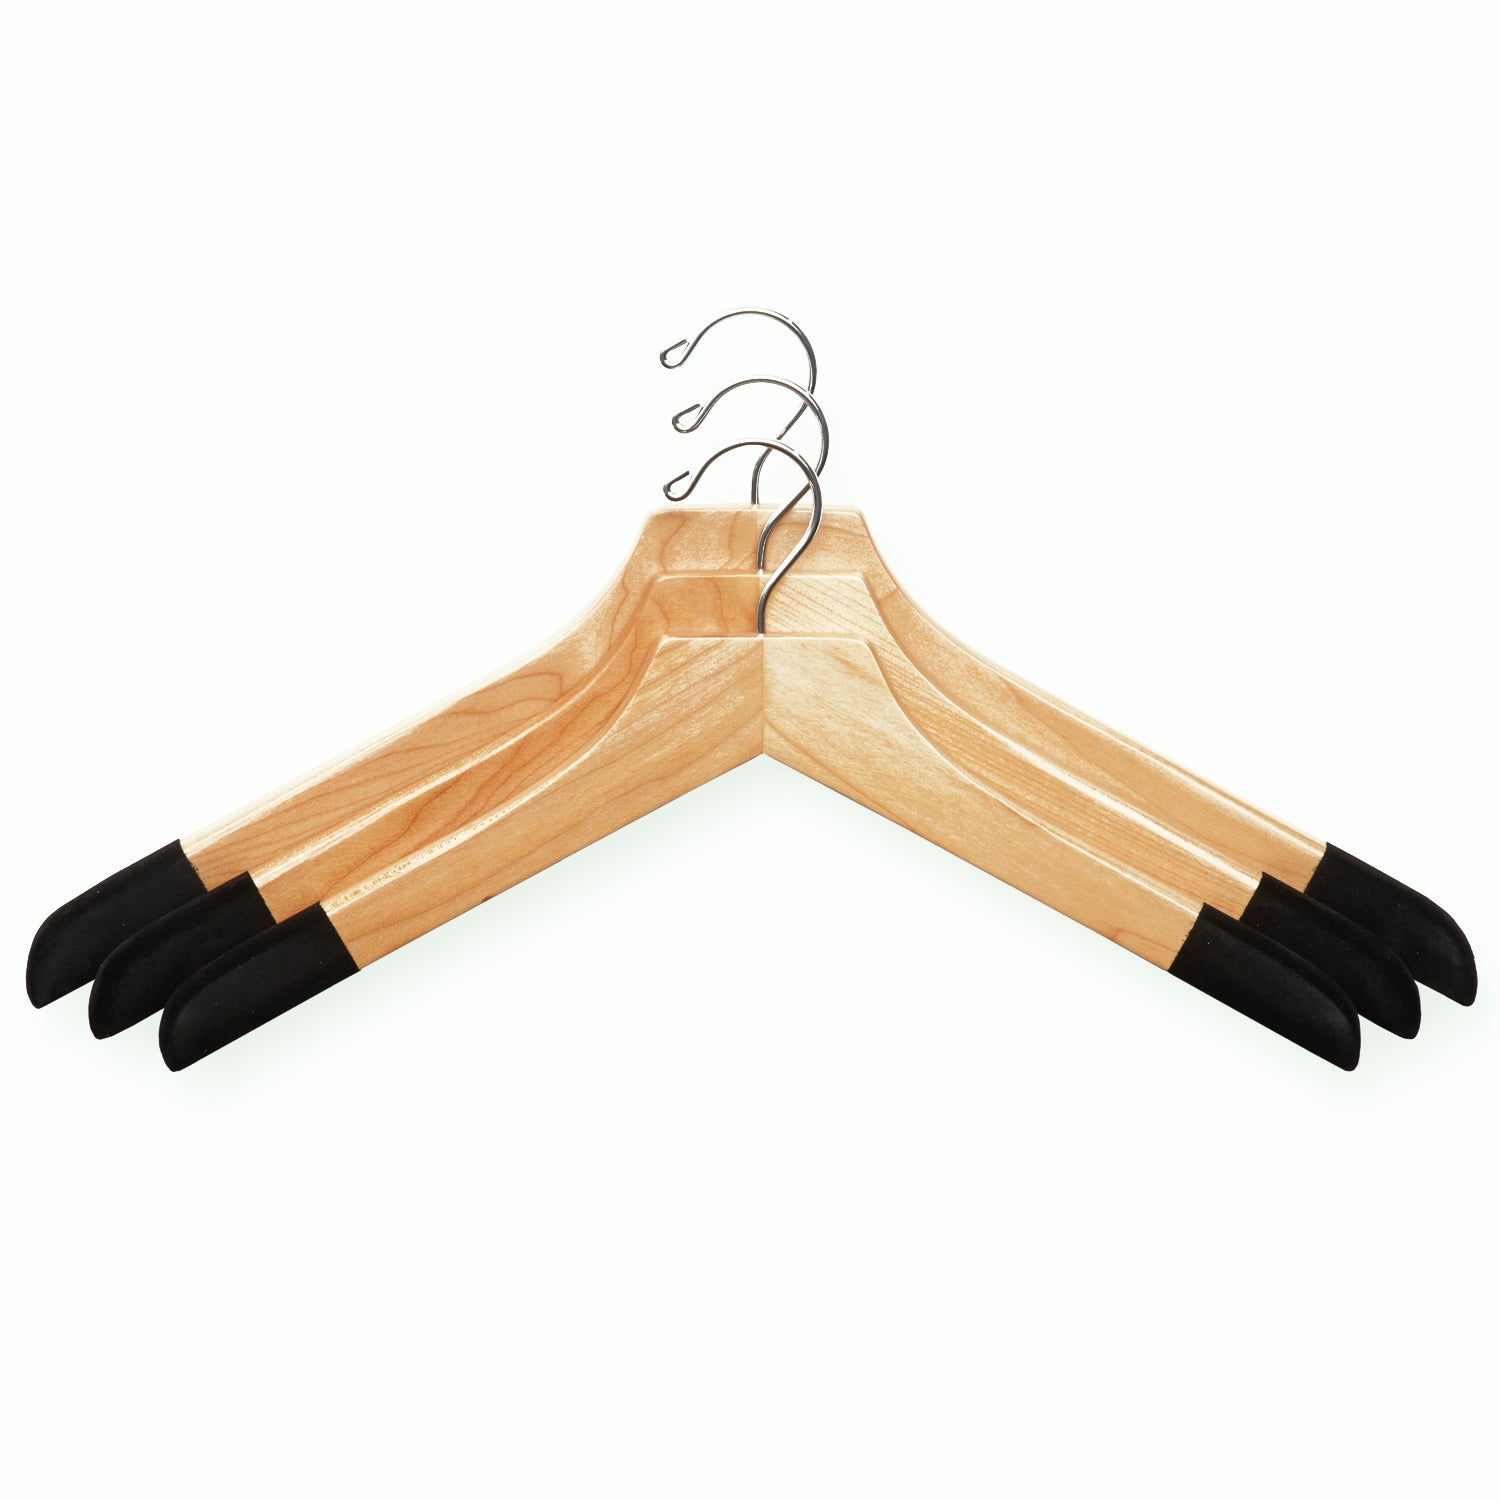 Four Extra-Large 21" Luxury Wooden Sweater and Polo Hangers with black handles on a white background from KirbyAllison.com.